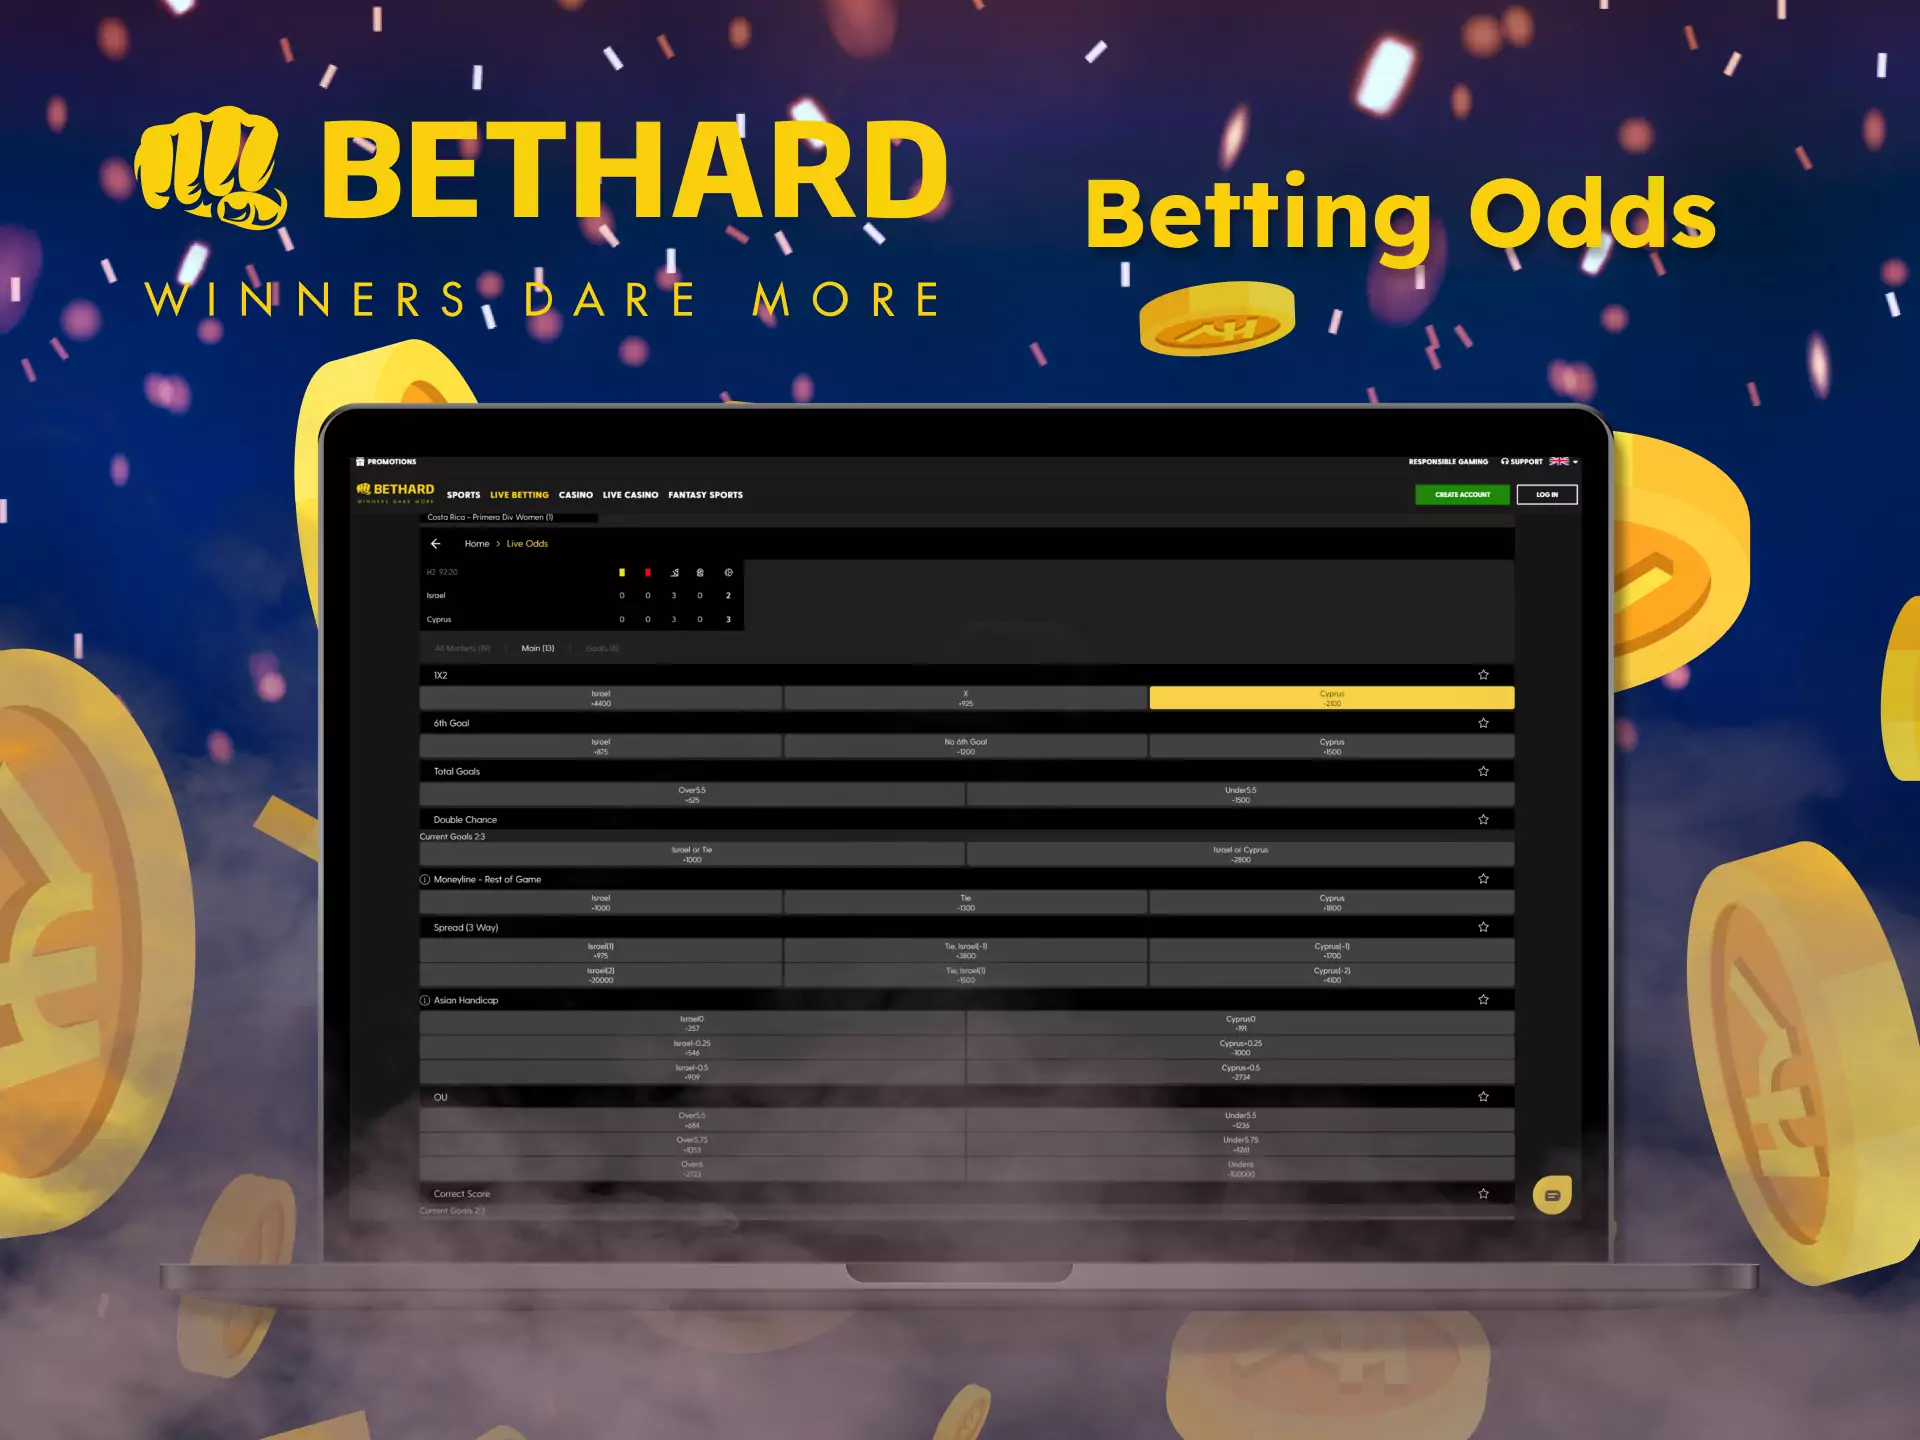 Bethard offers special betting odds for various sporting events.